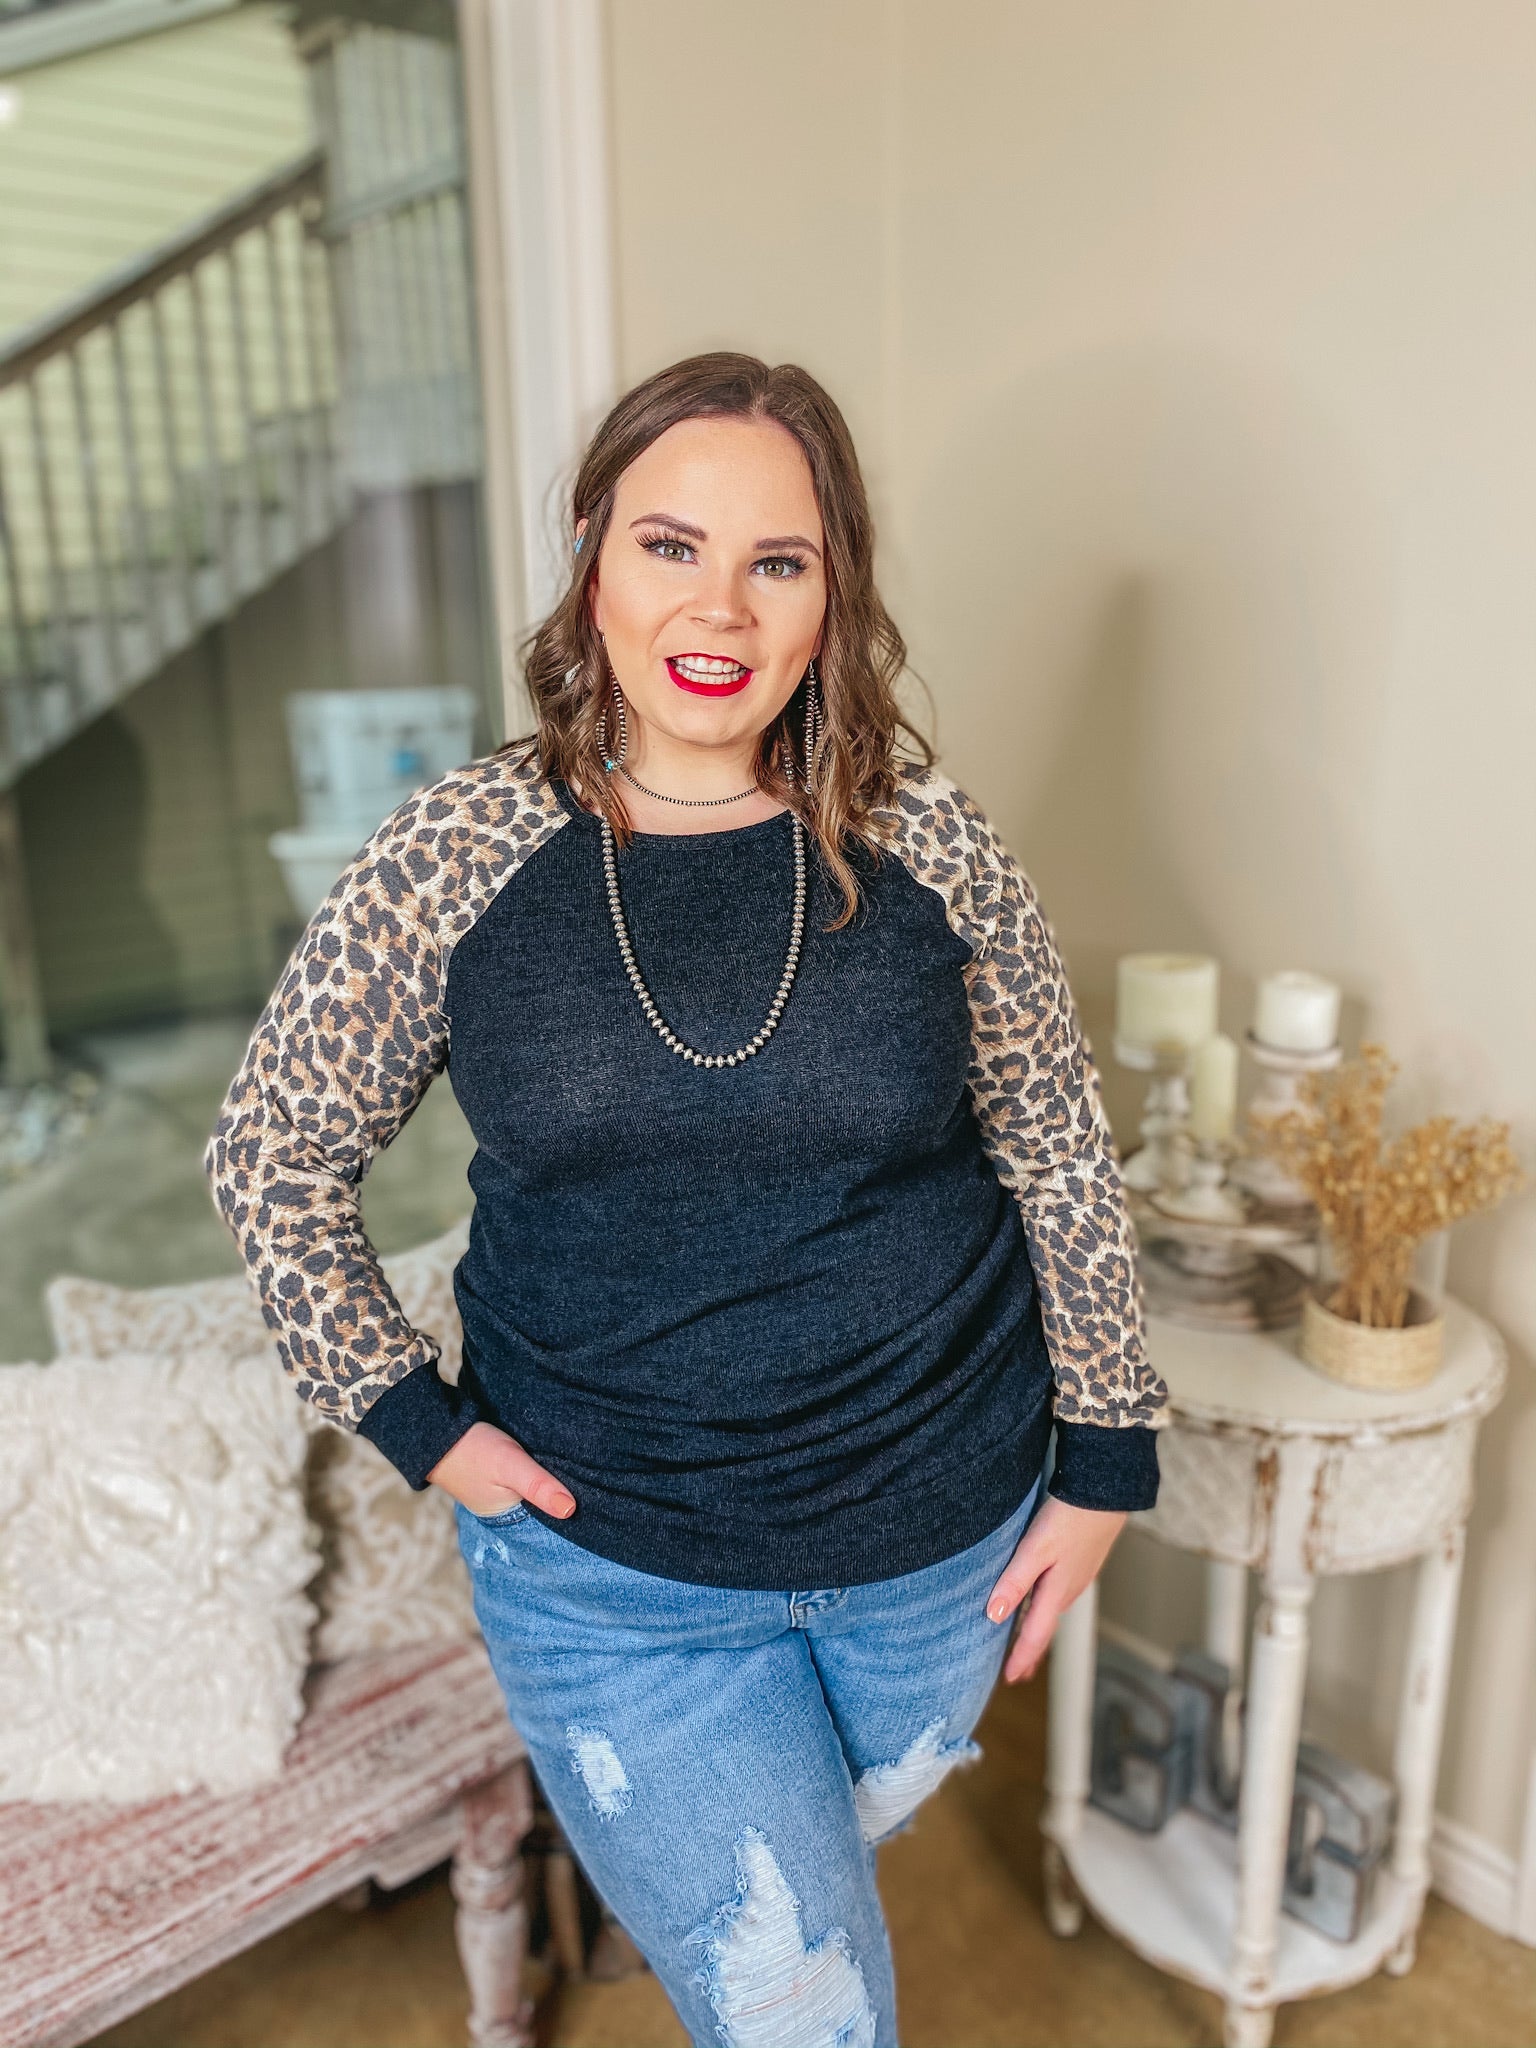 Low Key Loving Leopard Print Long Sleeve Top in Black - Giddy Up Glamour Boutique